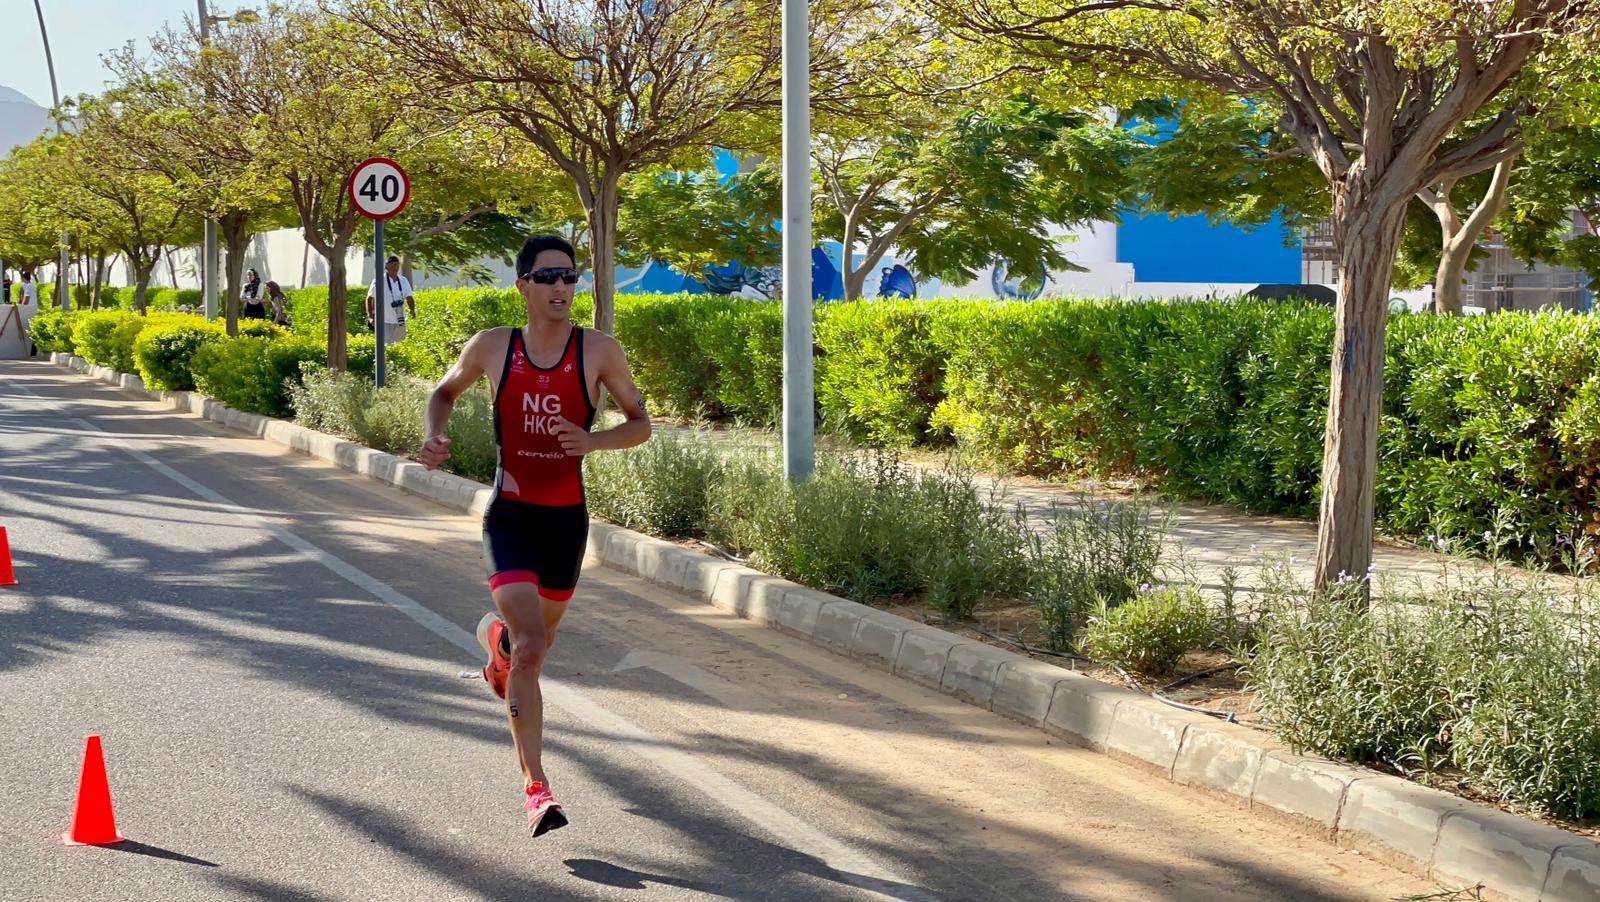 Jason Ng is entering the final stretch of his race to qualify for the Paris Olympics. Photo: HKTA